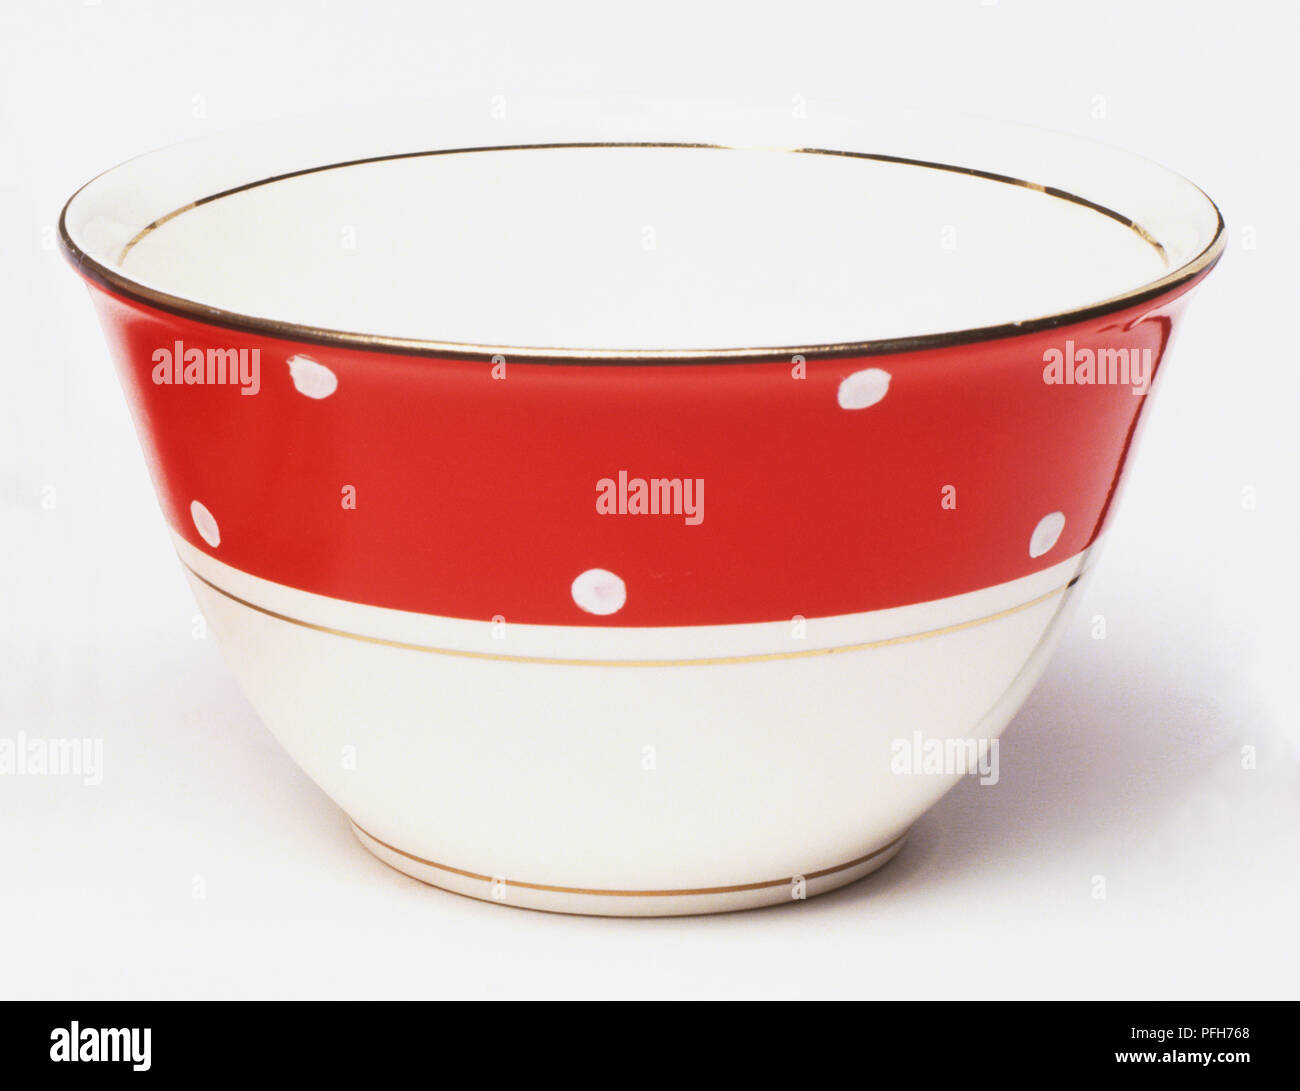 A red and white bowl, with a pattern of white dots and gold rim Stock Photo